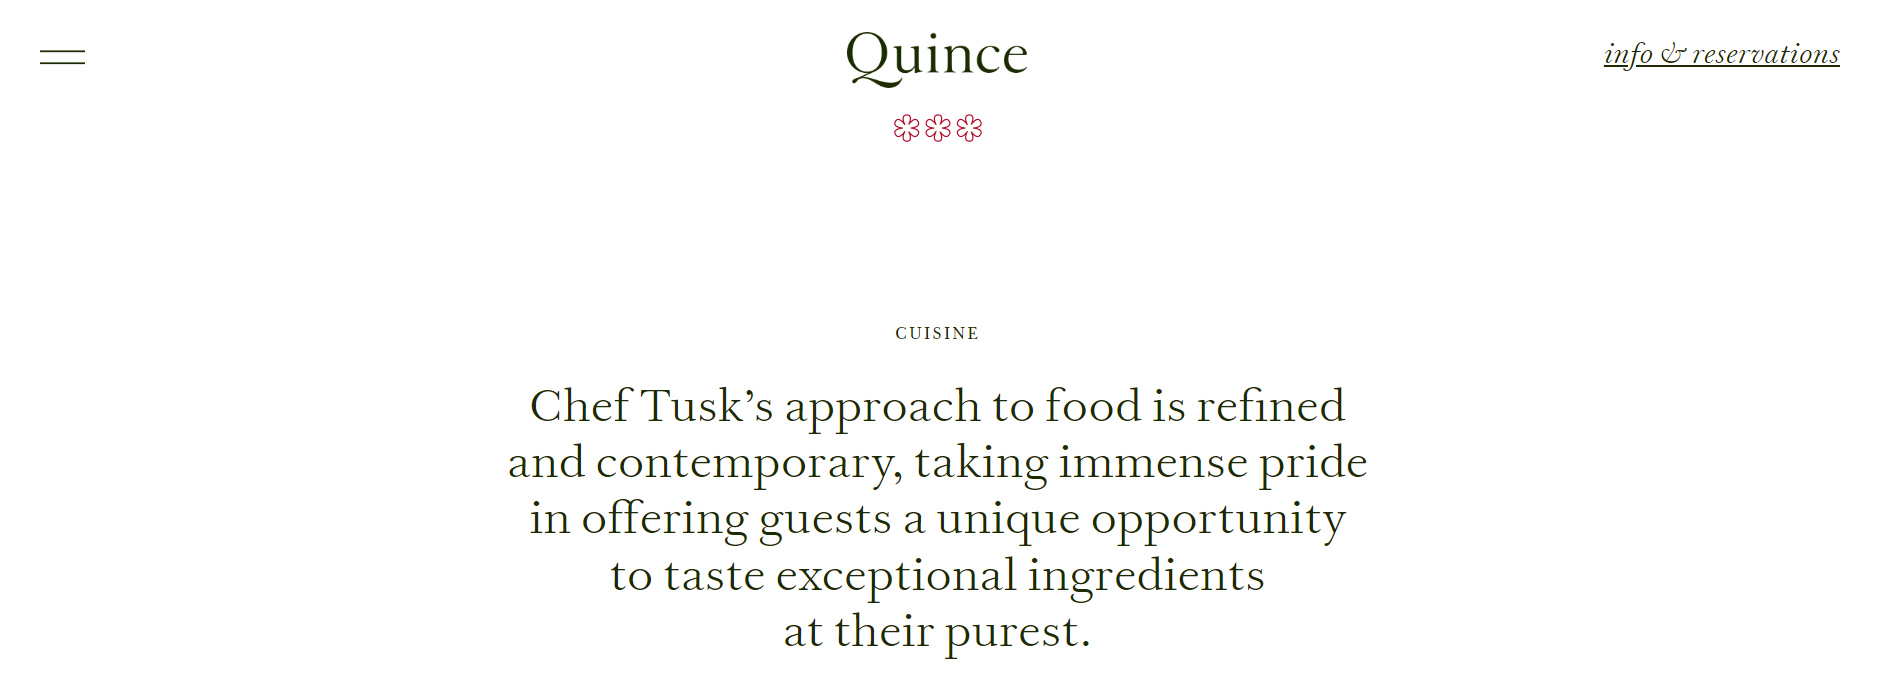 screenshot of the home page of the quince restaurant website 